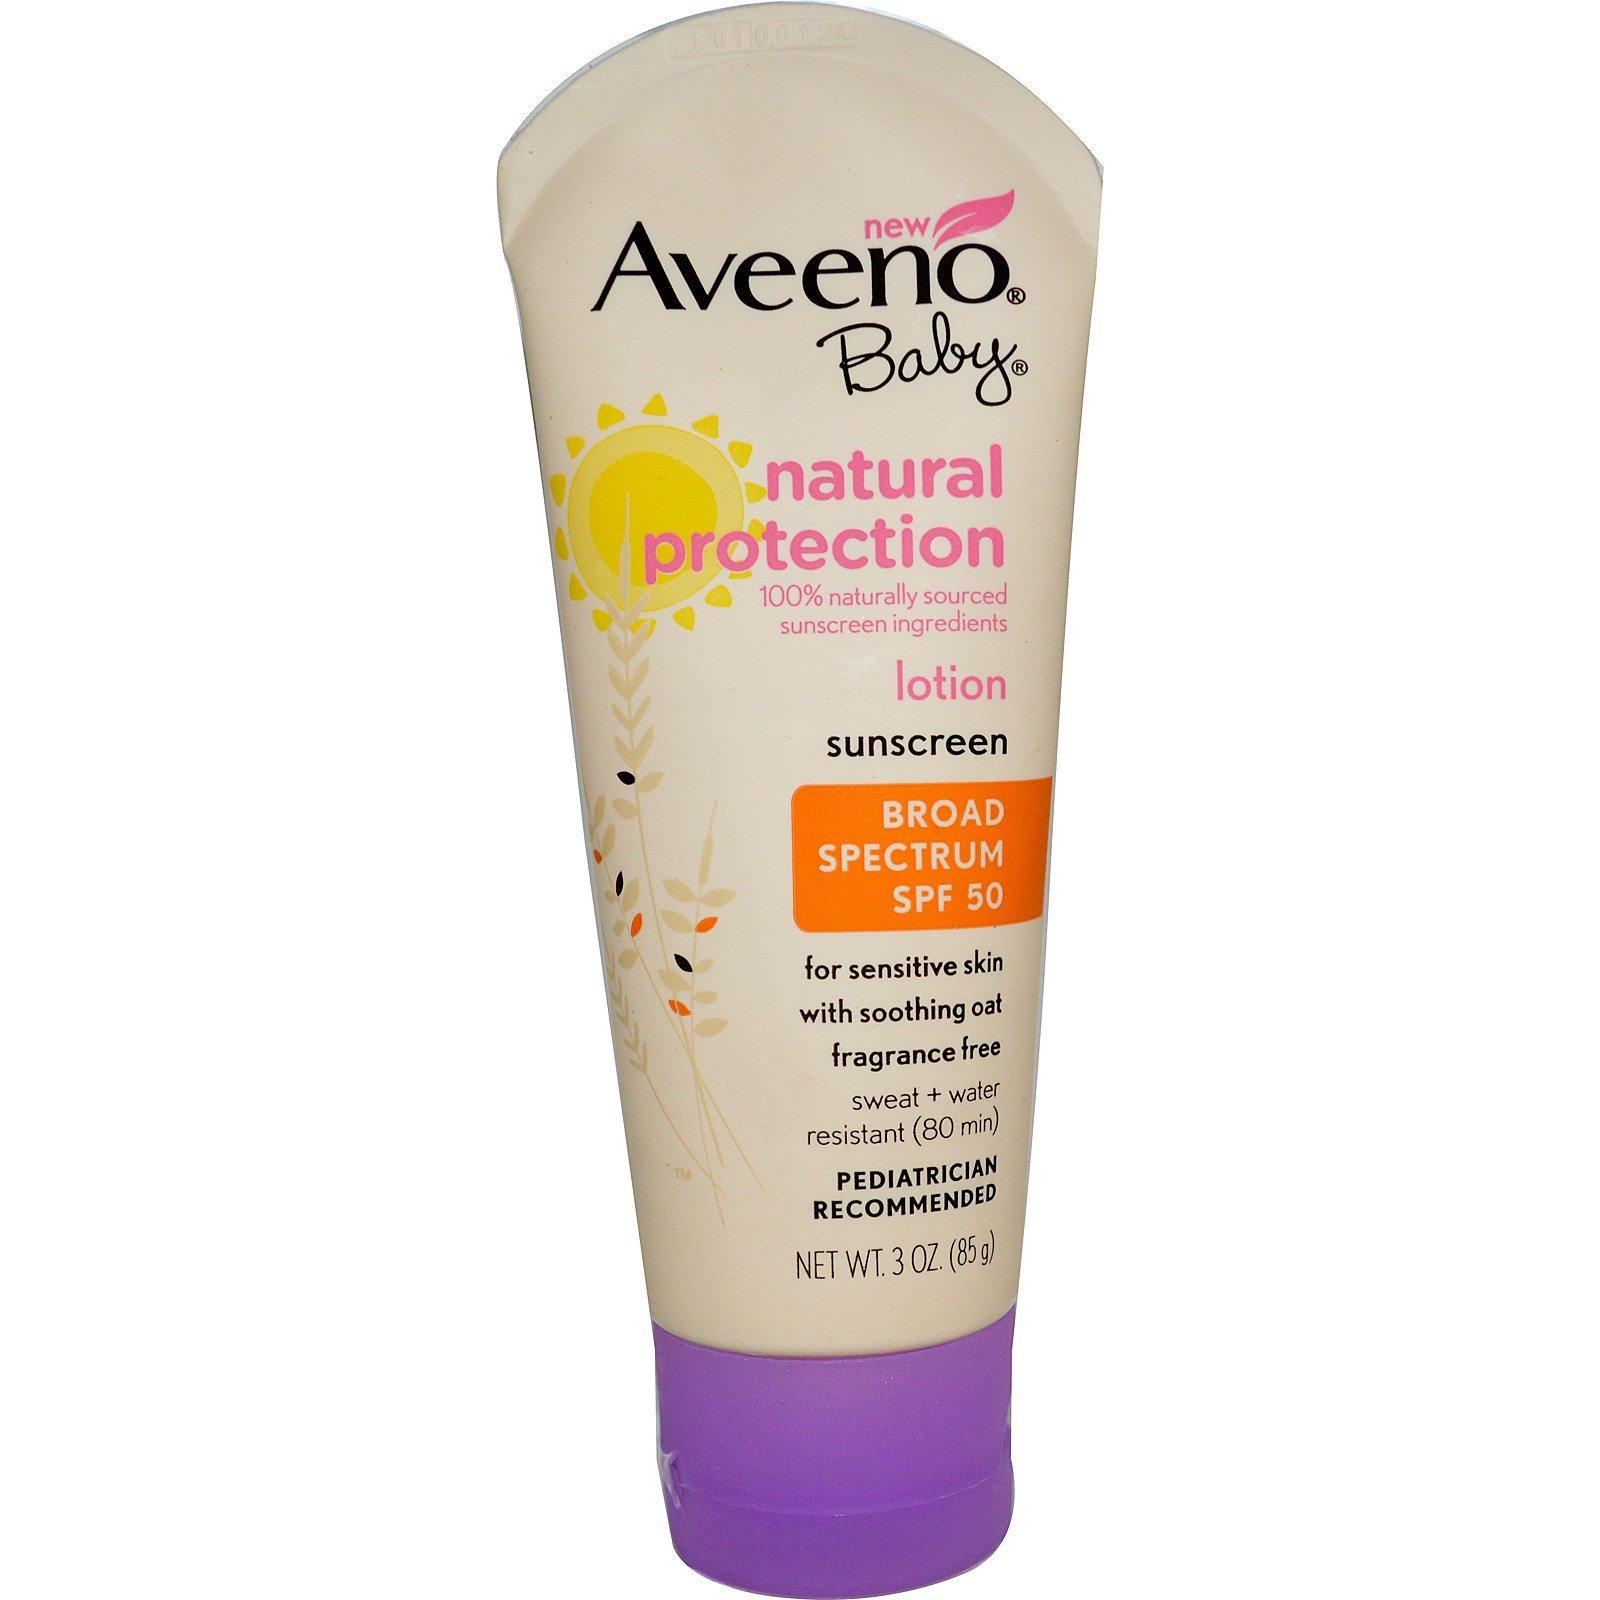 Baby Natural Protection Lotion Sunscreen with Broad Spectrum SPF 50